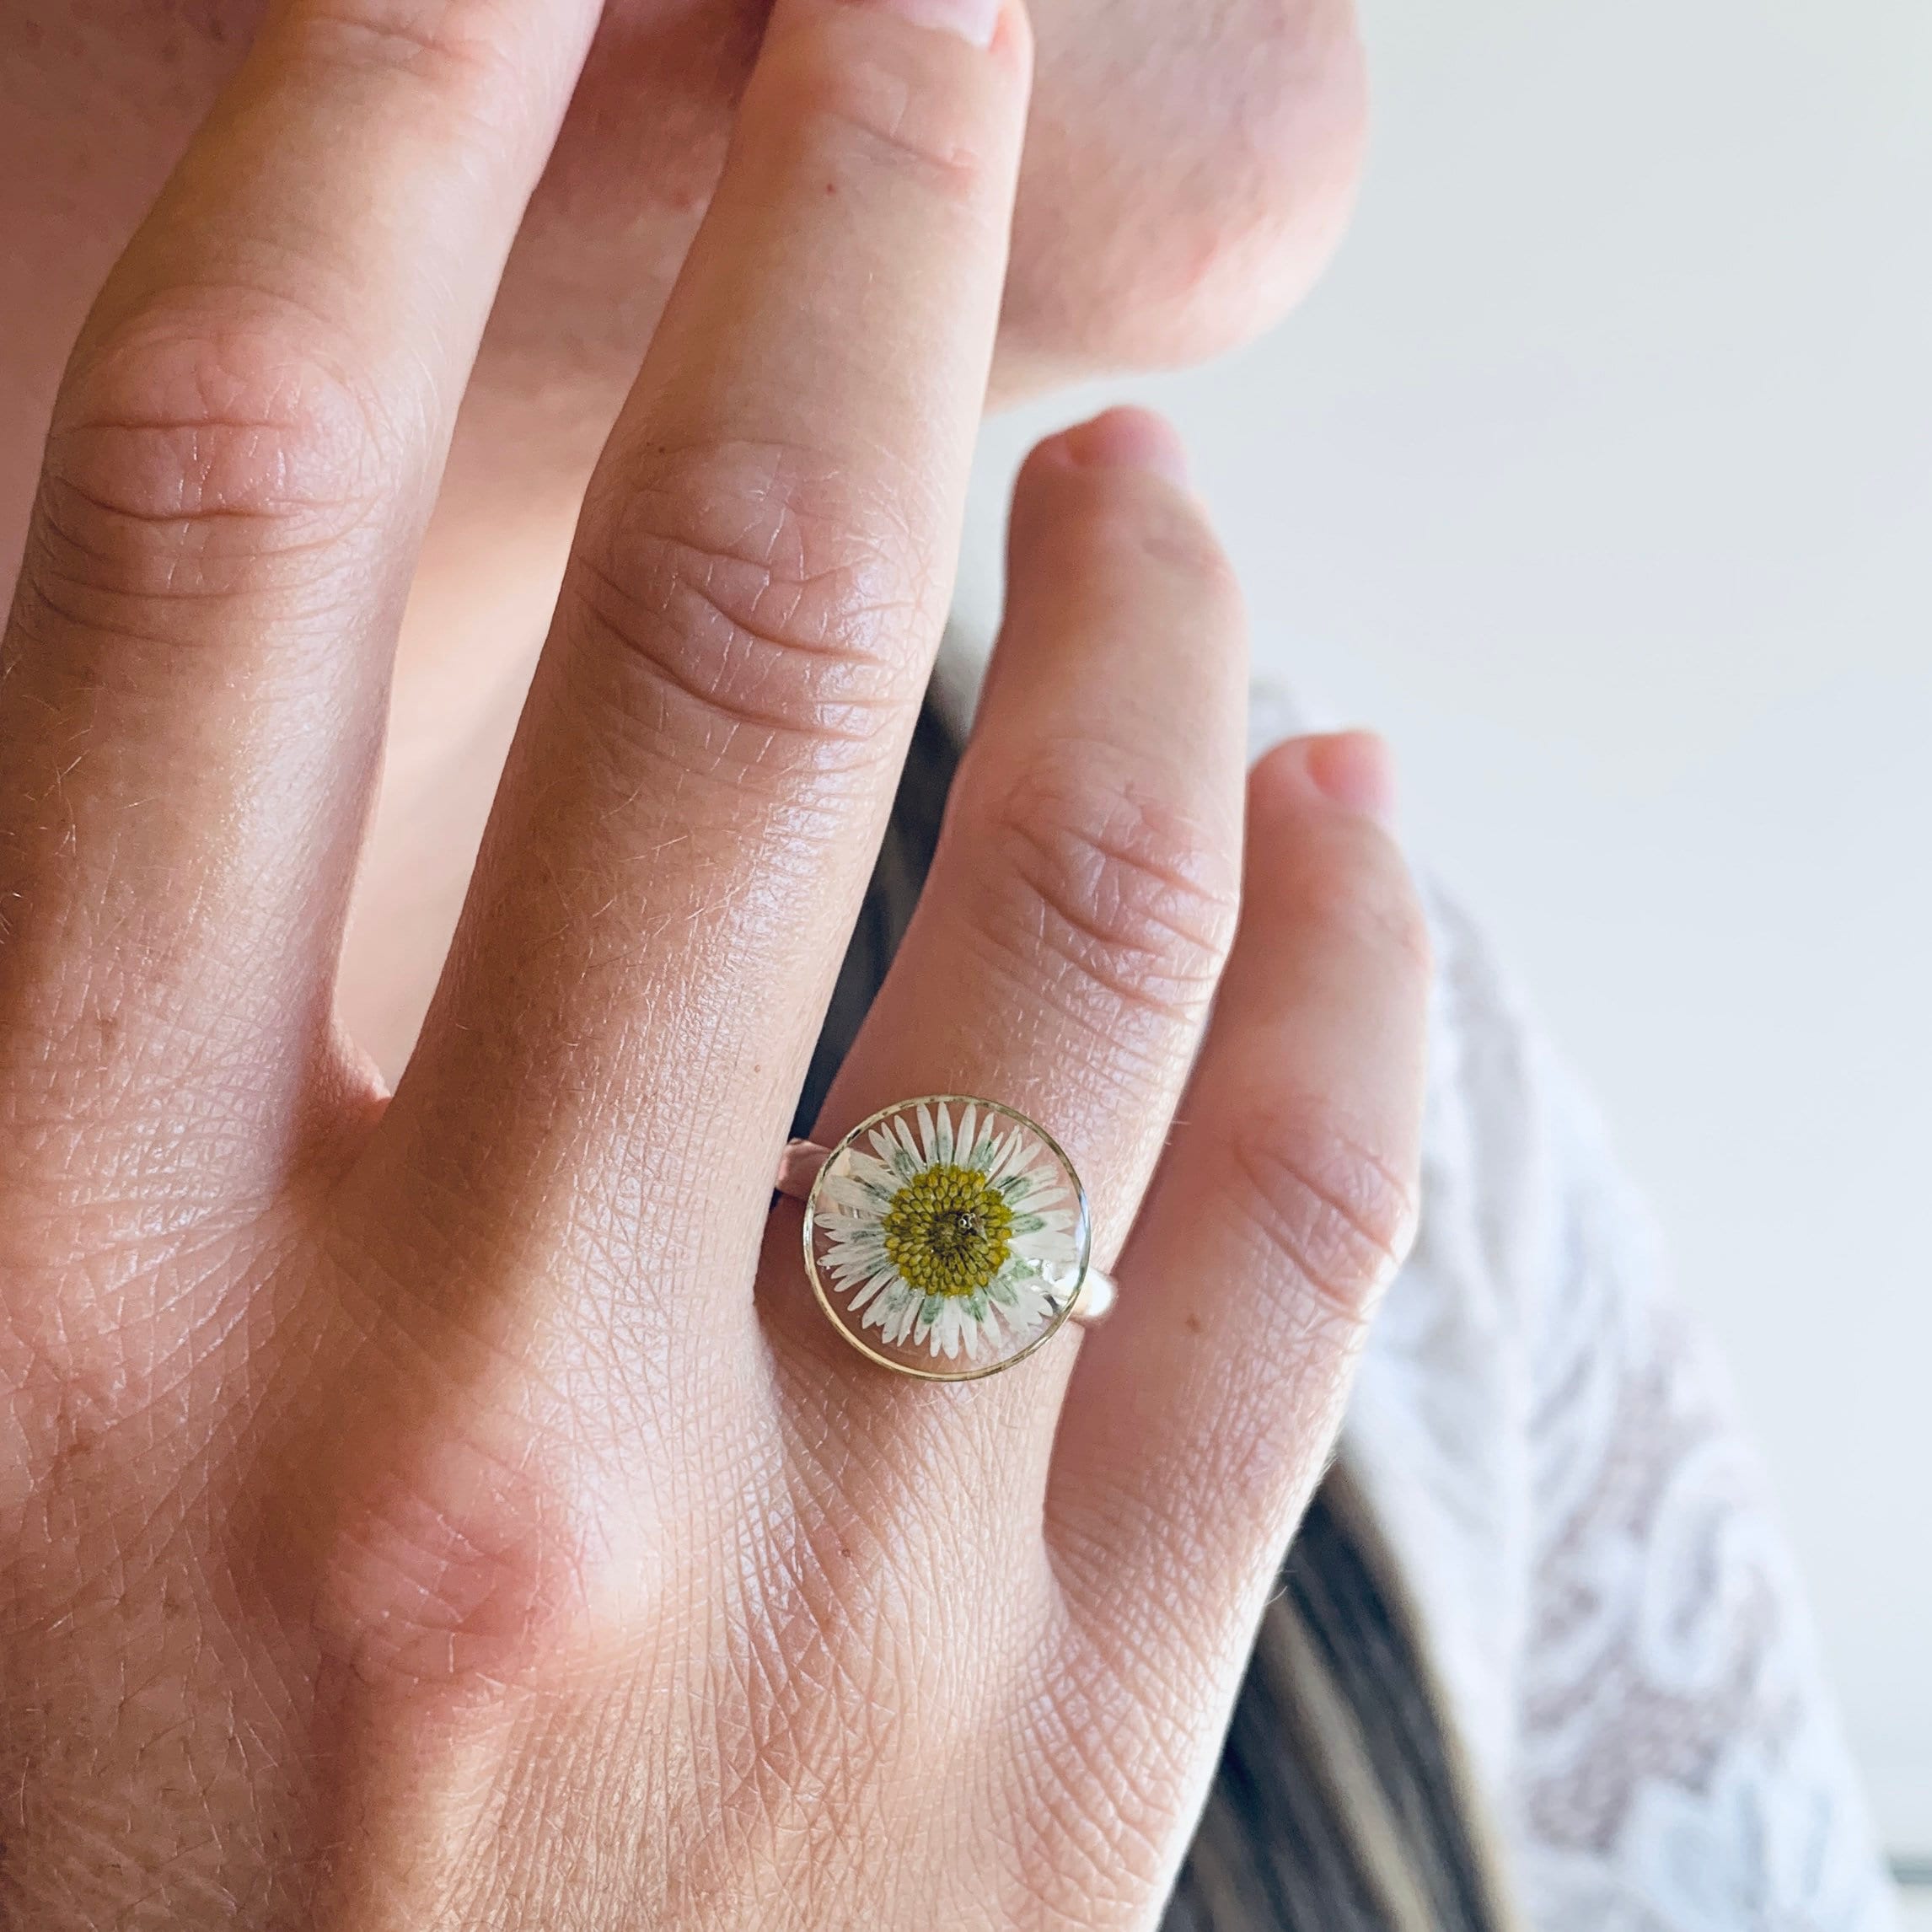 Resin Ring With Real Dried Daisy Flower // Handmade Pressed picture pic